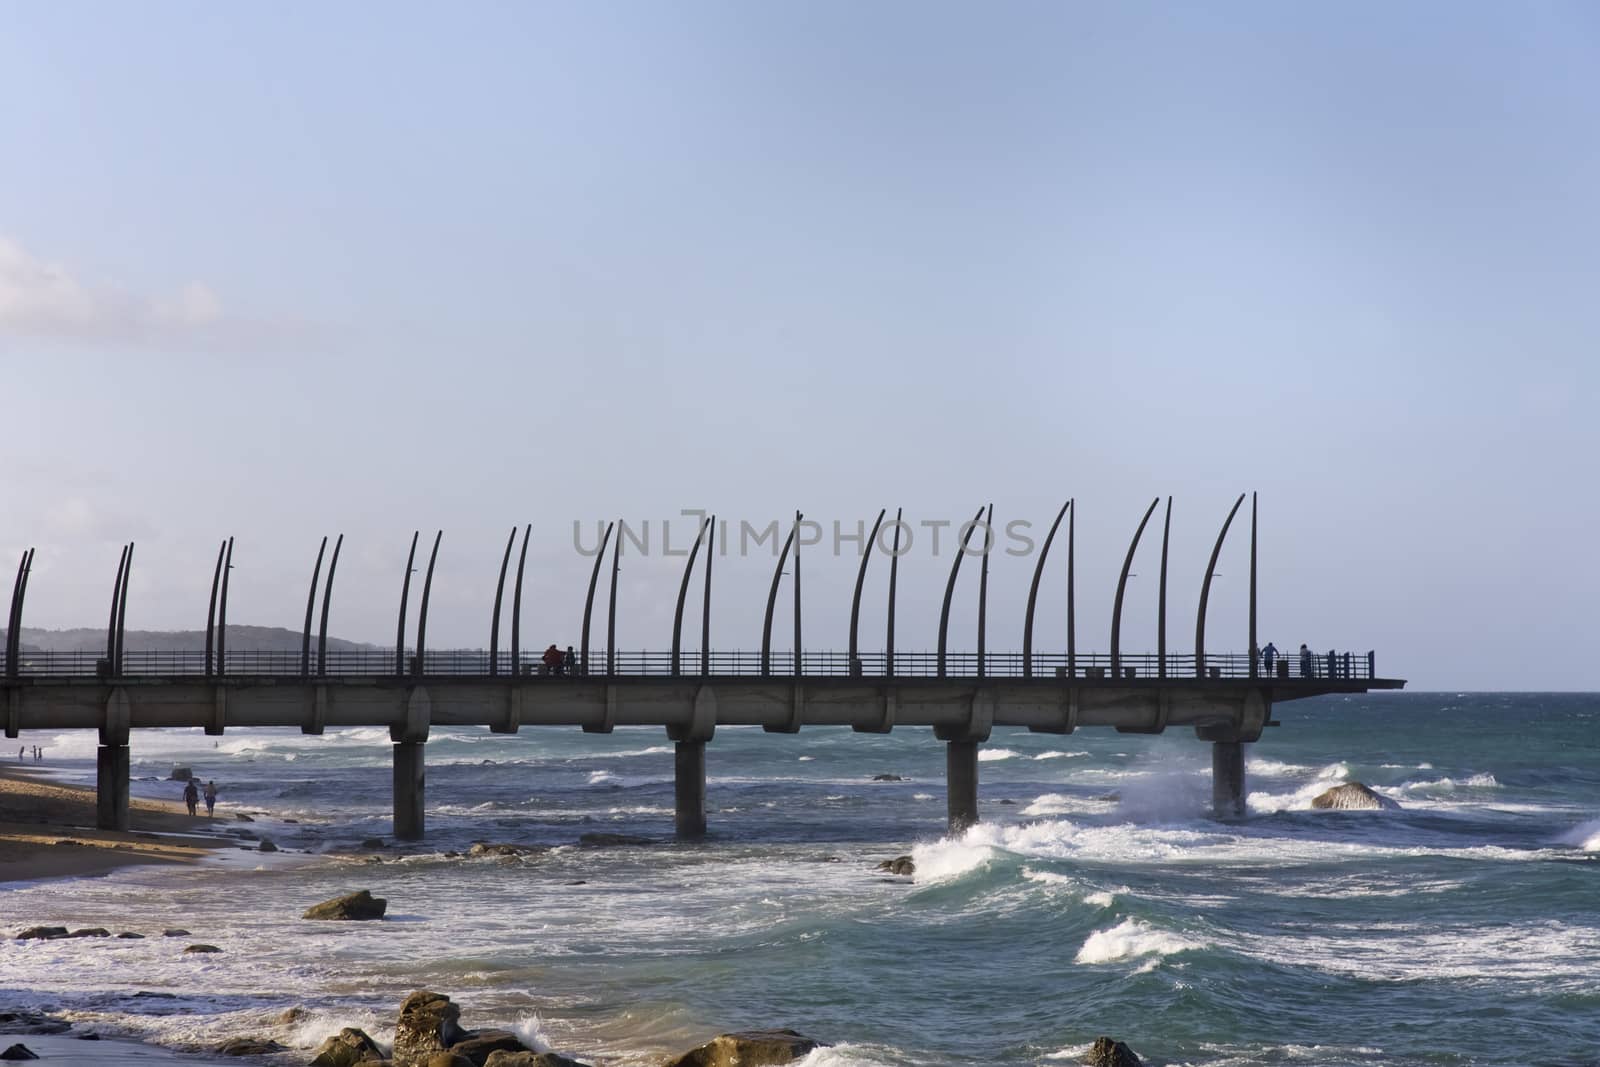 Pier at Umhlanga Rocks in Durban, South Africa